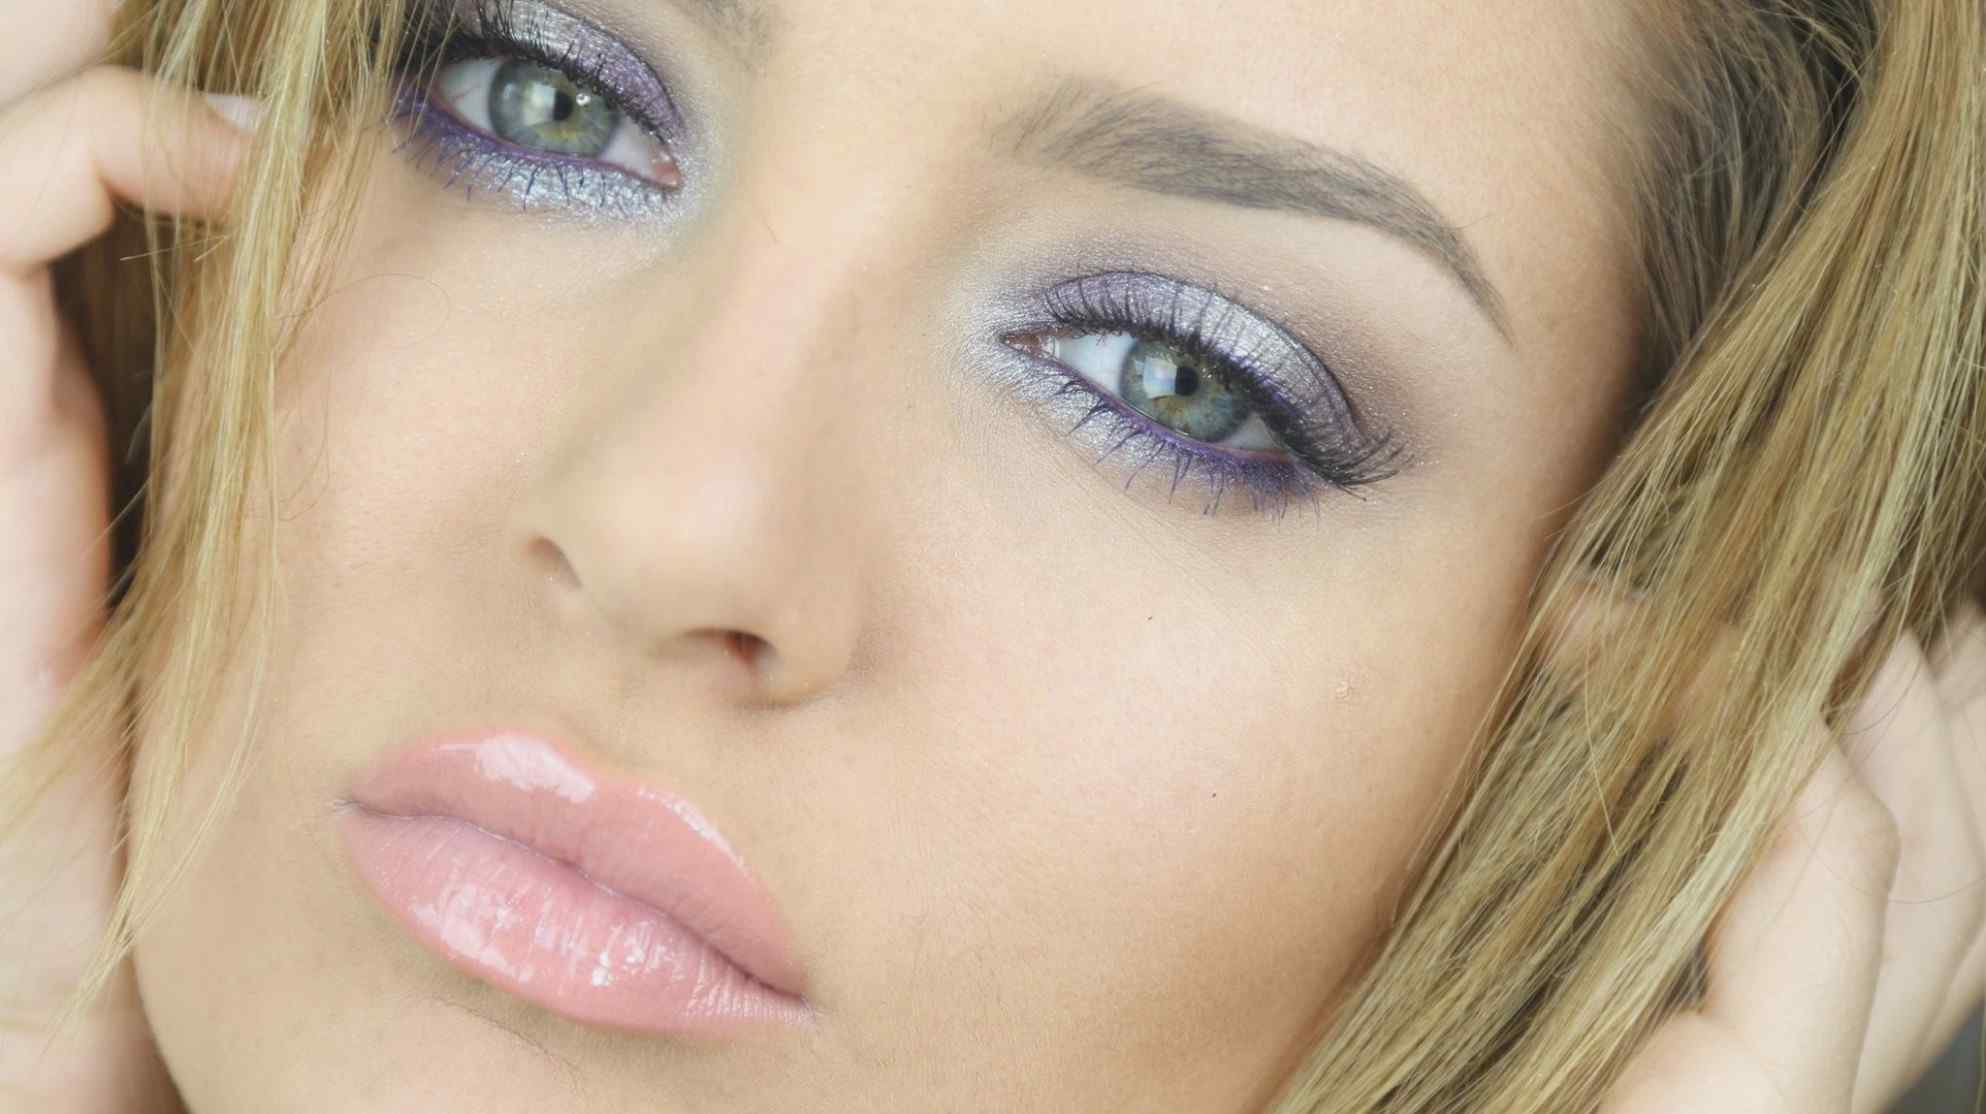 Eye Makeup For Blue Eyes And Blonde Hair Blonde Hair Makeup Blue Eyes Make Up New Eye Makeup Ideas For Blue